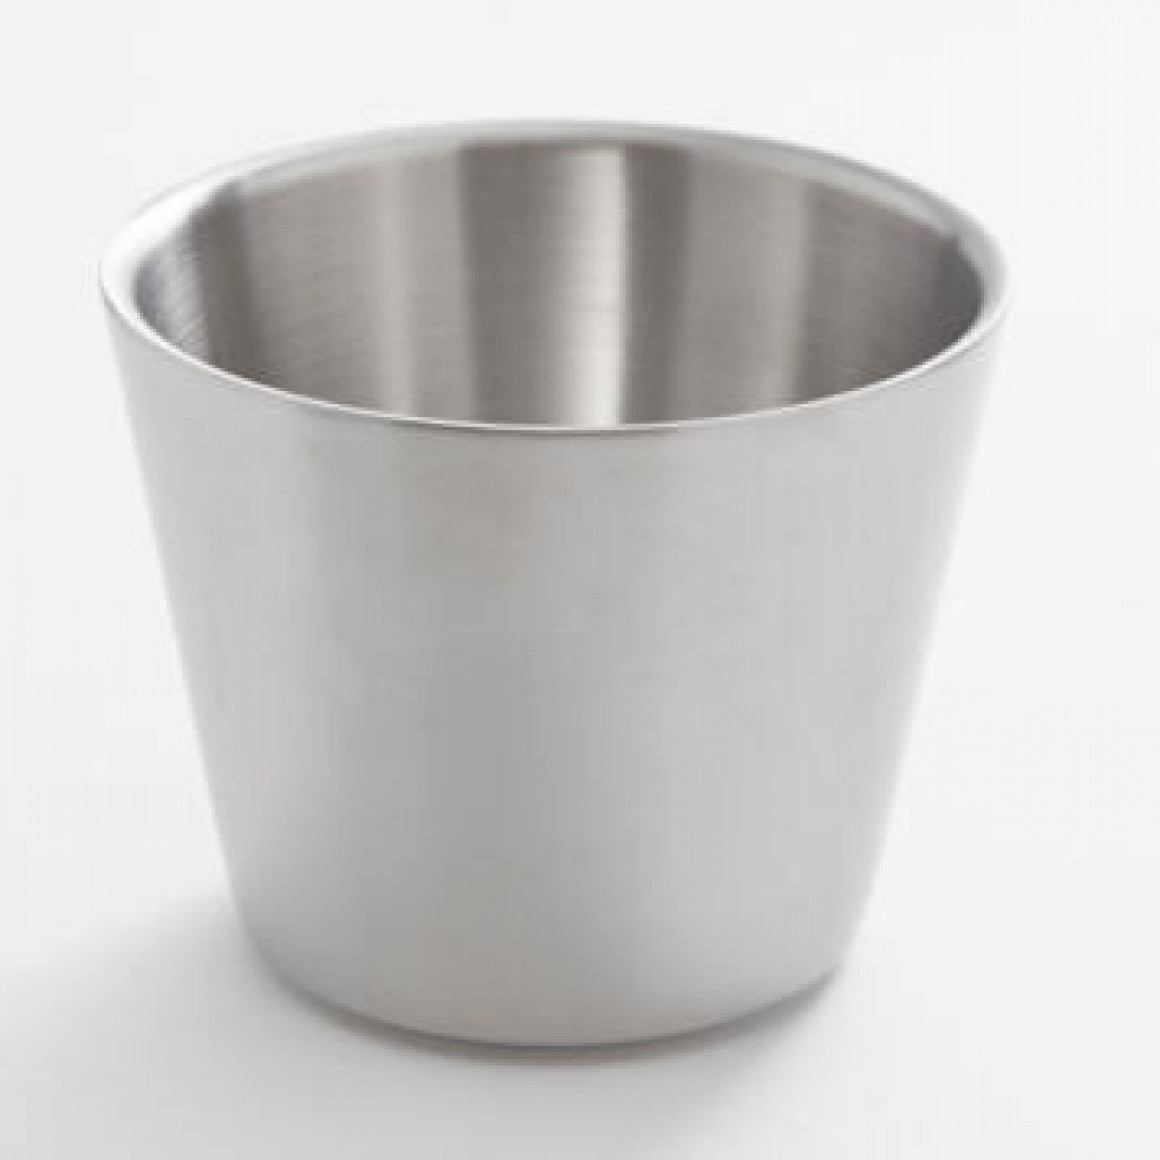 SAUCE CUP, STAINLESS STEEL, DOUBLE WALL, 8.5 OZ.